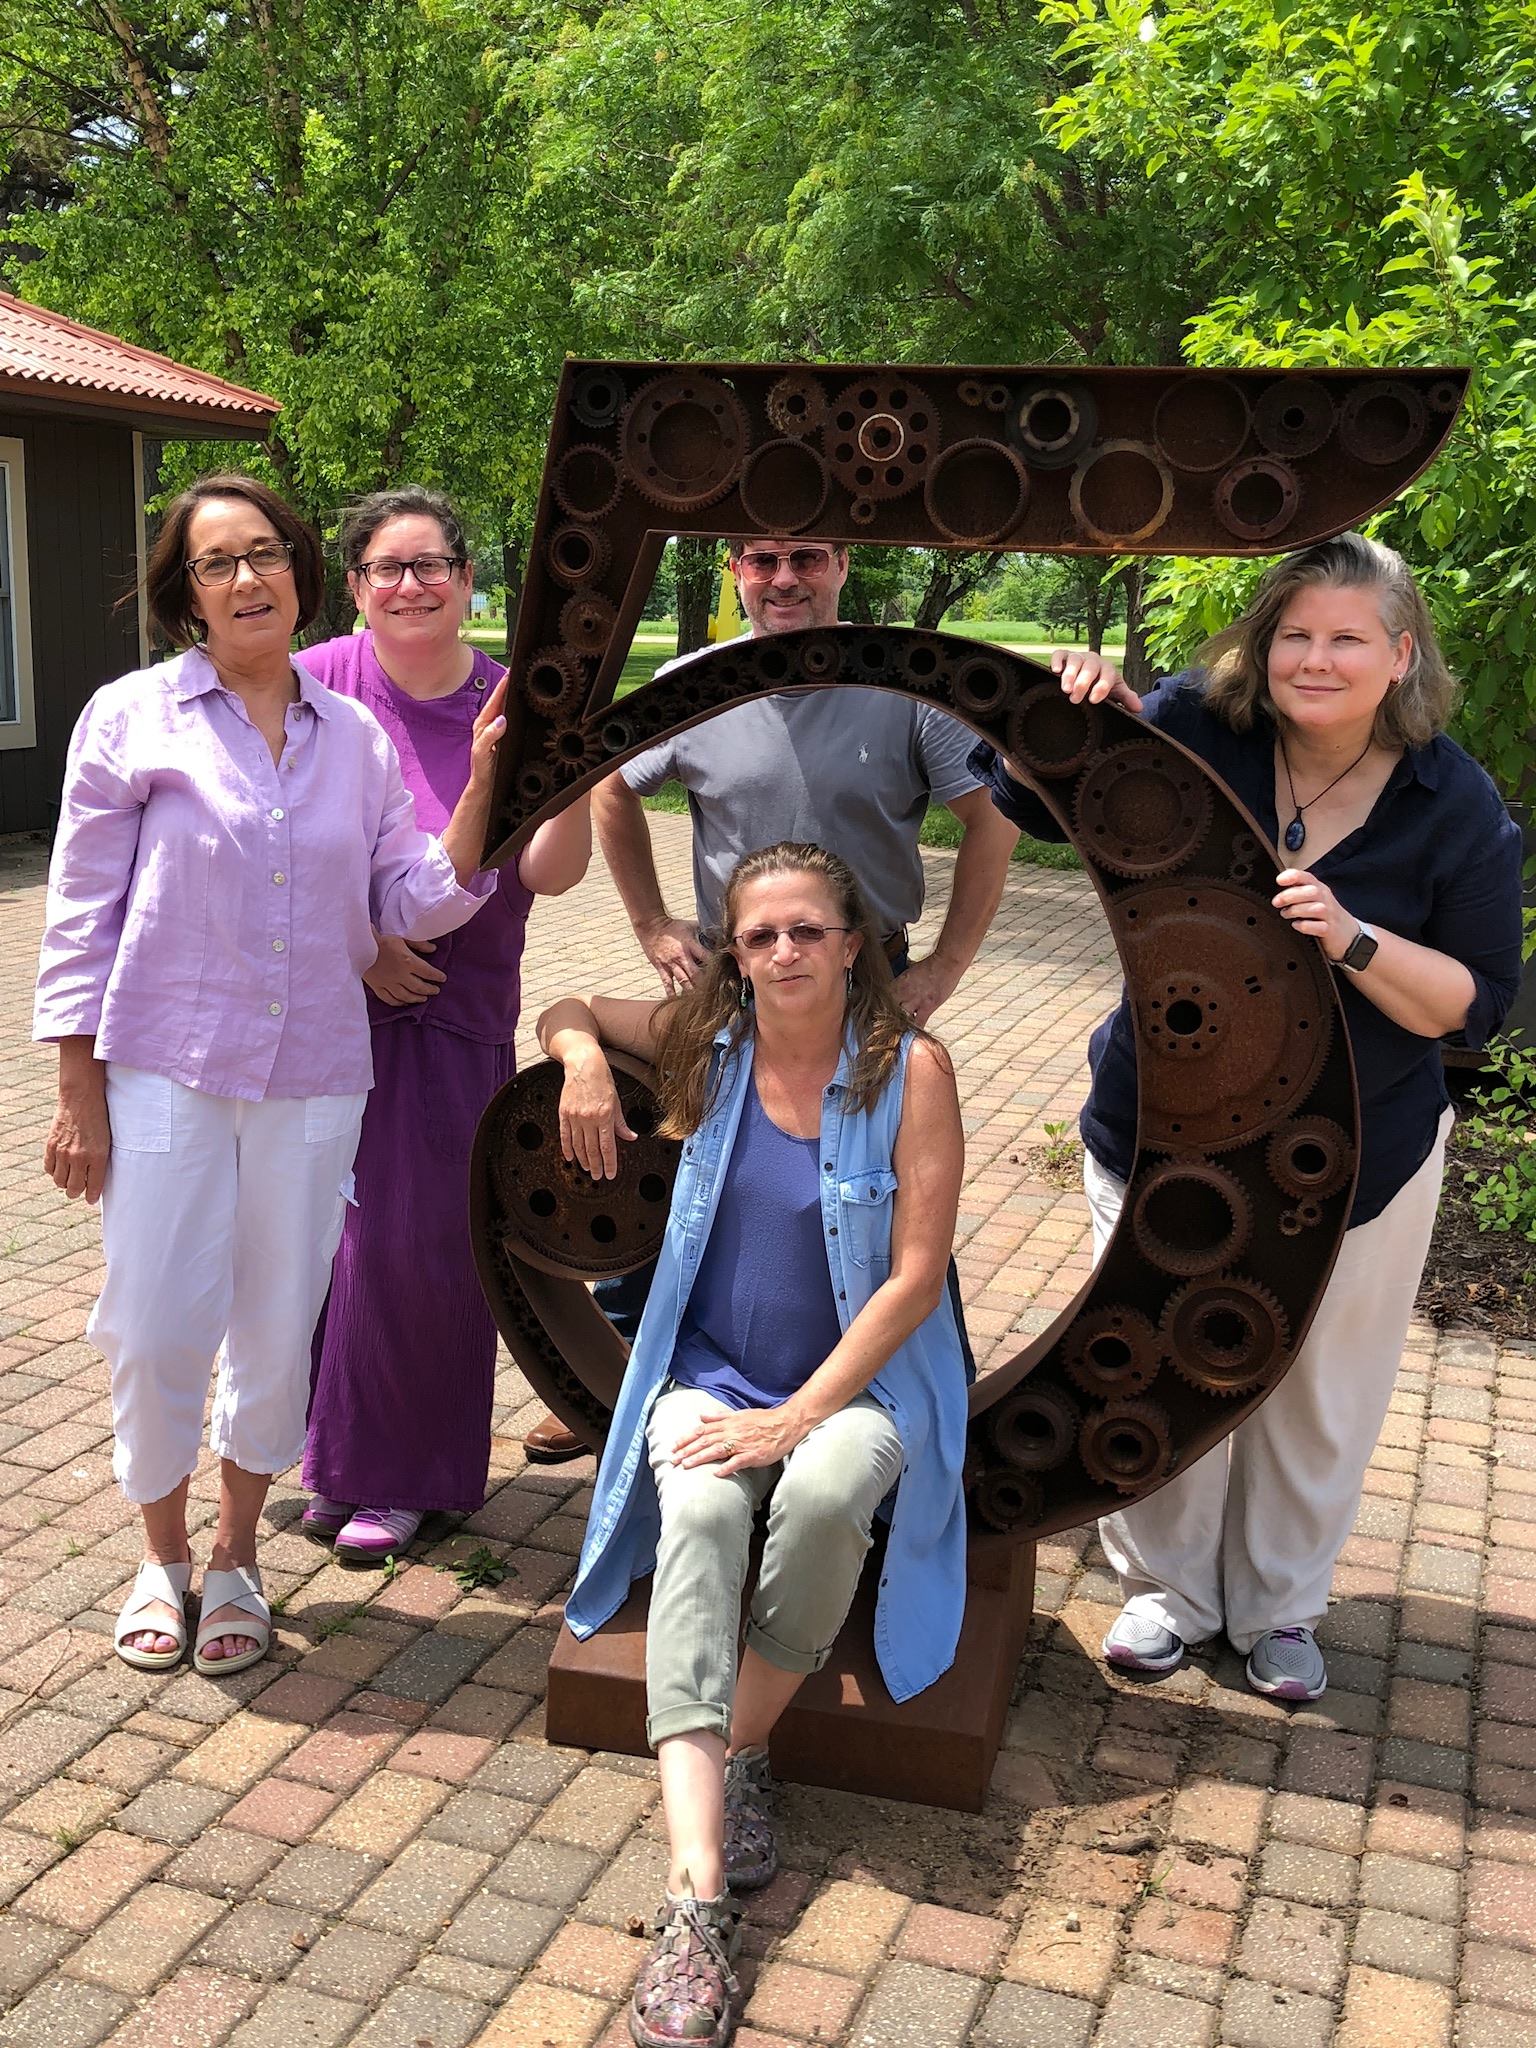 Group photo with the metal “5” at the north studio patio (five studios in this area). [Image description: five Deaf artists are posing around the metal “5” sculpture. Brenda is on the left in a lavender shirt and white pants with lavender fingernails. To the right of Brenda is Lilah, dressed in purple cotton. Behind the 5 is Tony, arms akimbo. Sitting below Tony on the 5 is Cynthia in denim sleeveless long shirt with tan capri pants and blue tank top. To the far right is Katherine, in a black V neck shirt with a pretty necklace and tan pants. All are smiling].